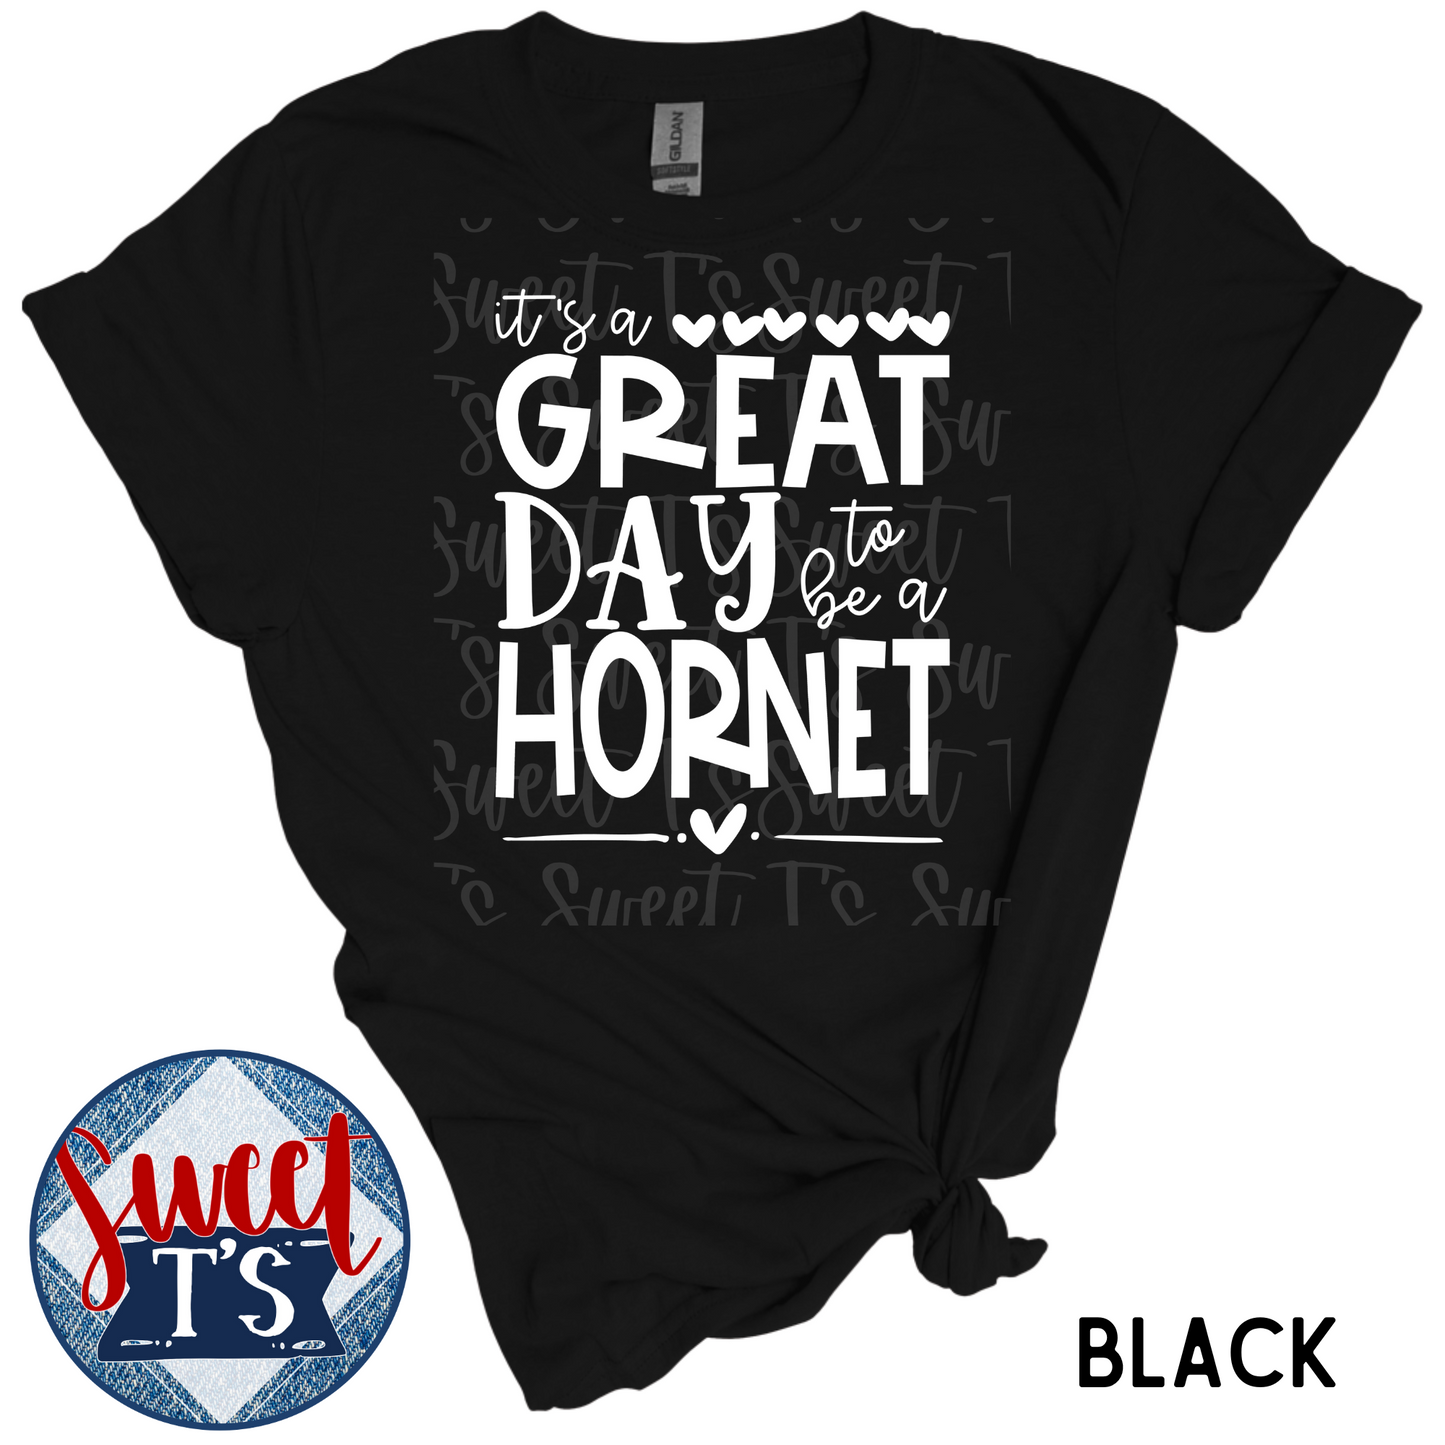 Great Day Hornets (white print)